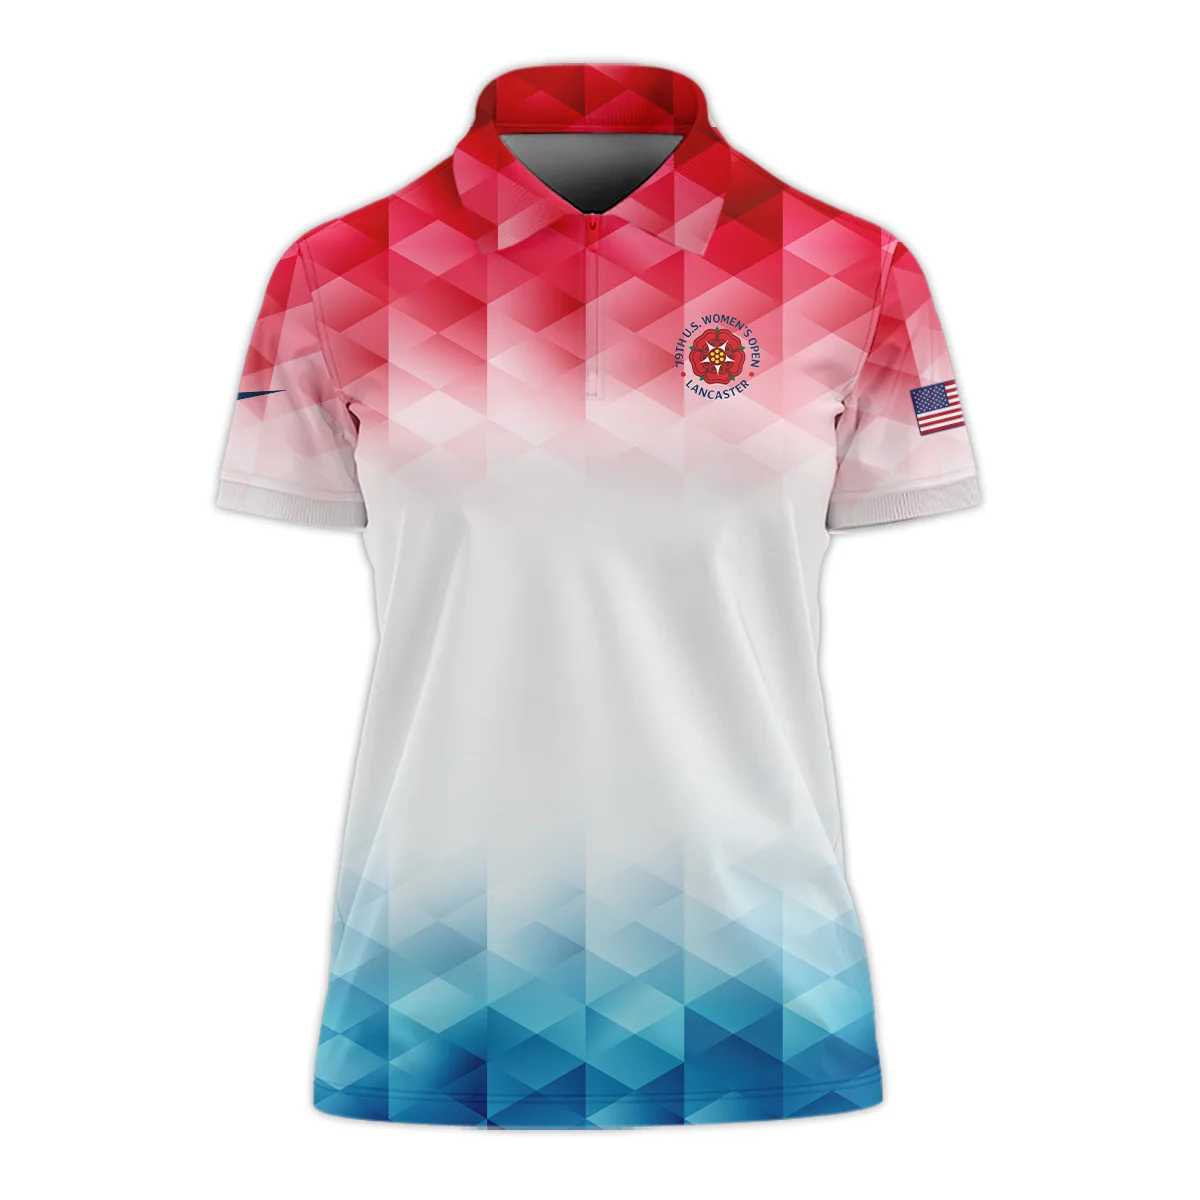 79th U.S. Women’s Open Lancaster Nike Blue Red Abstract Sleeveless Polo Shirt